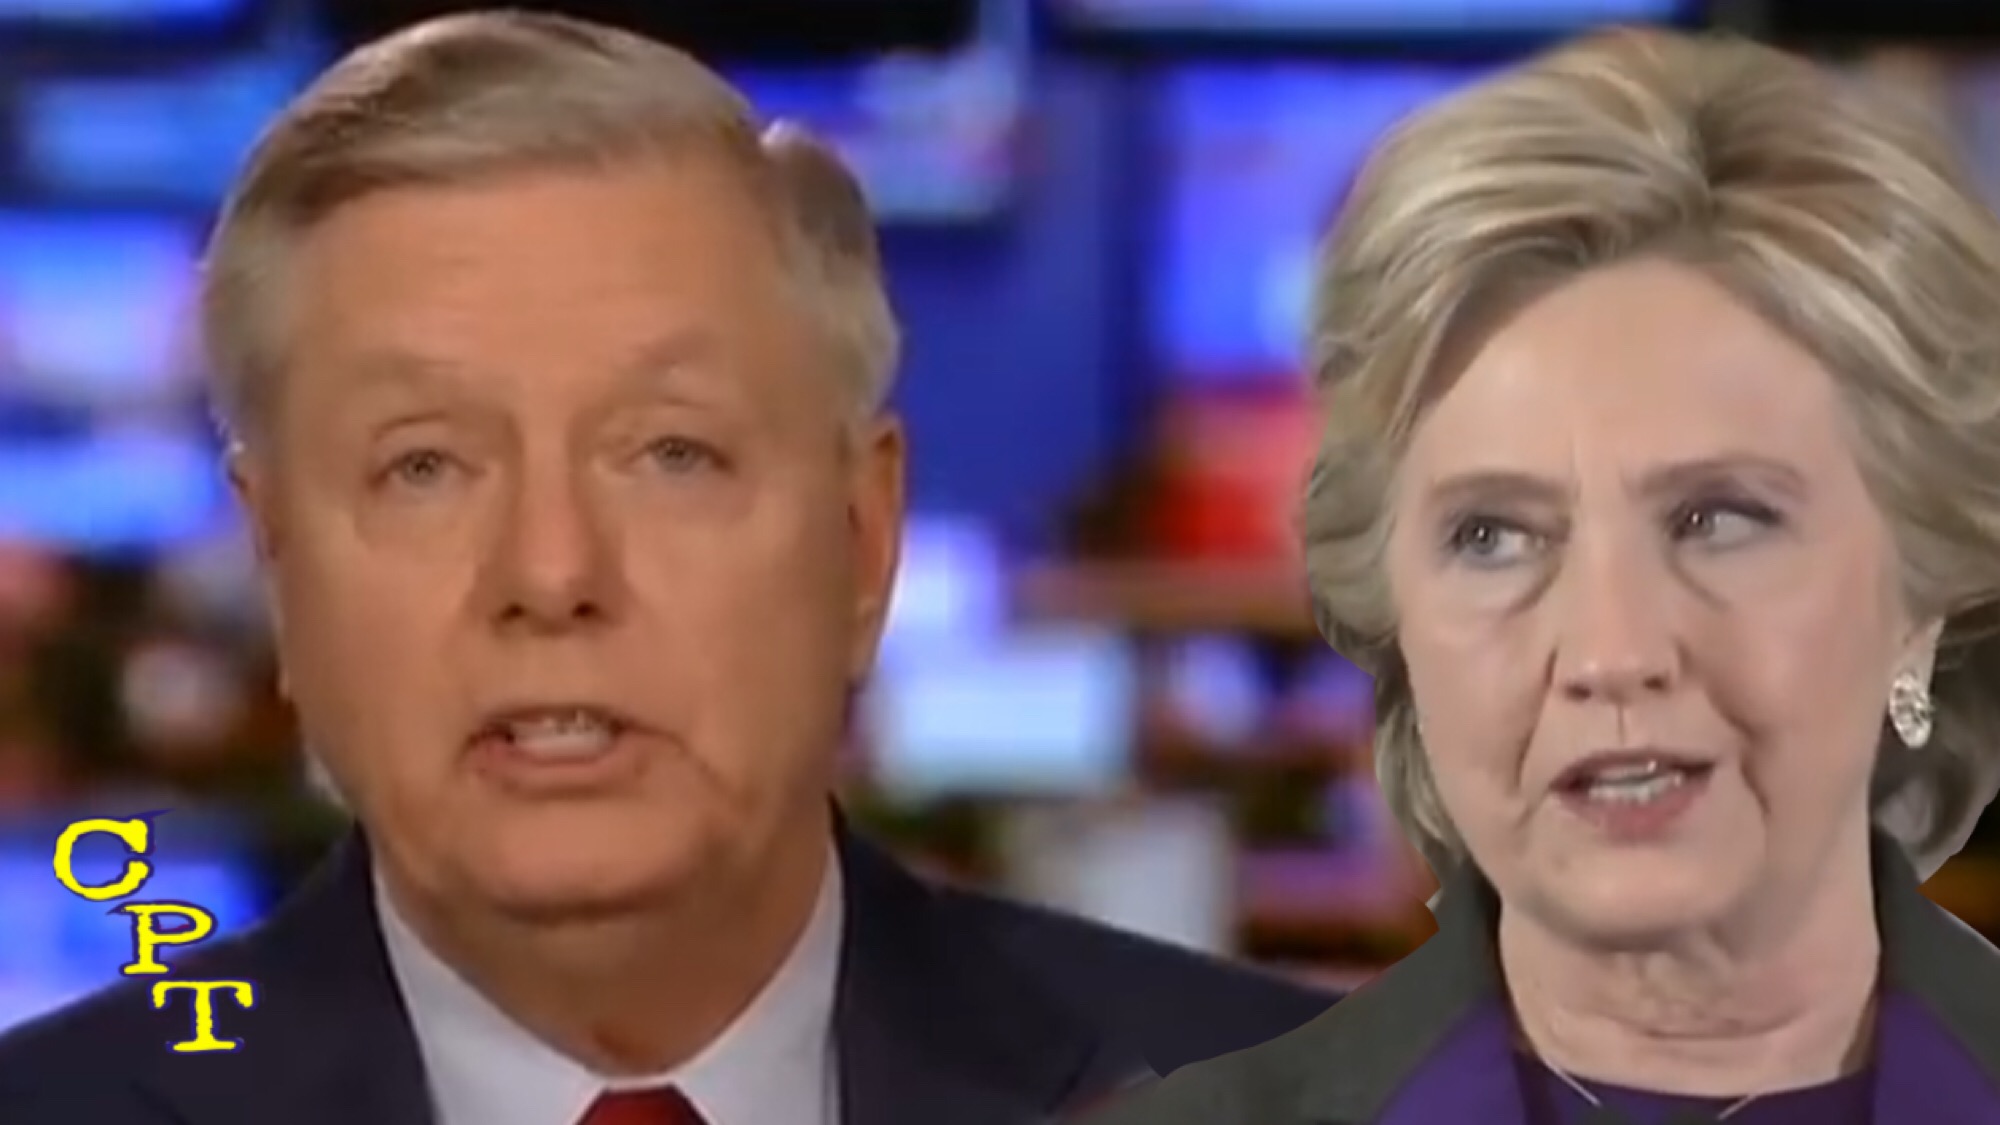 Lindsey Calls For Special Counsel For Hillary Clinton After New Leak Rocks DC - KAG Daily